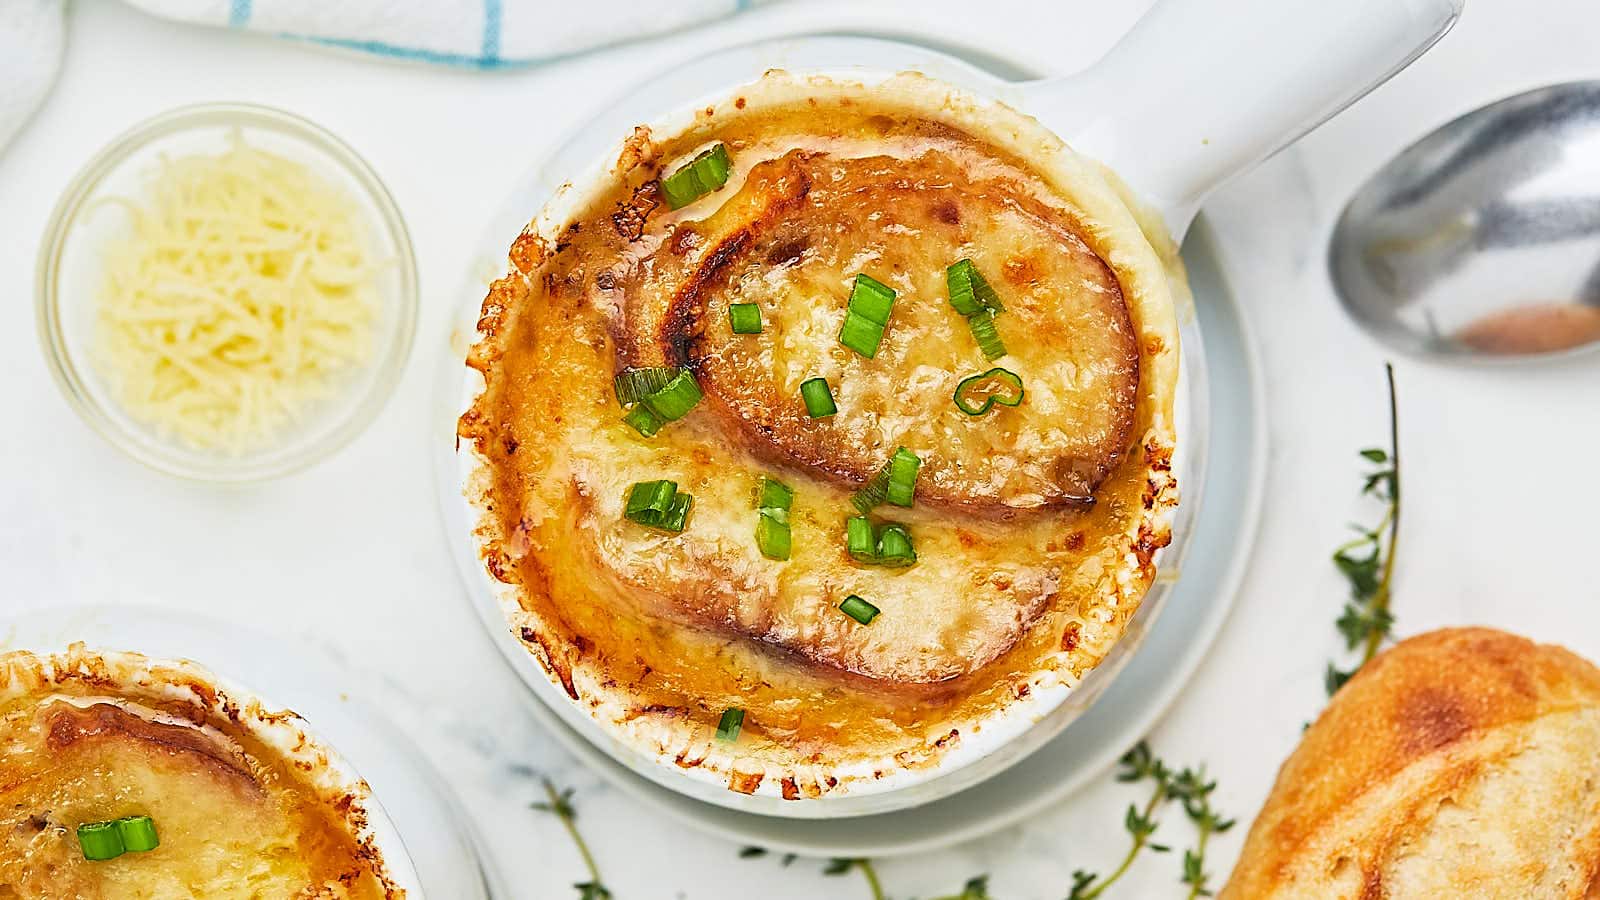 French Onion Soup recipe by Cheerful Cook.